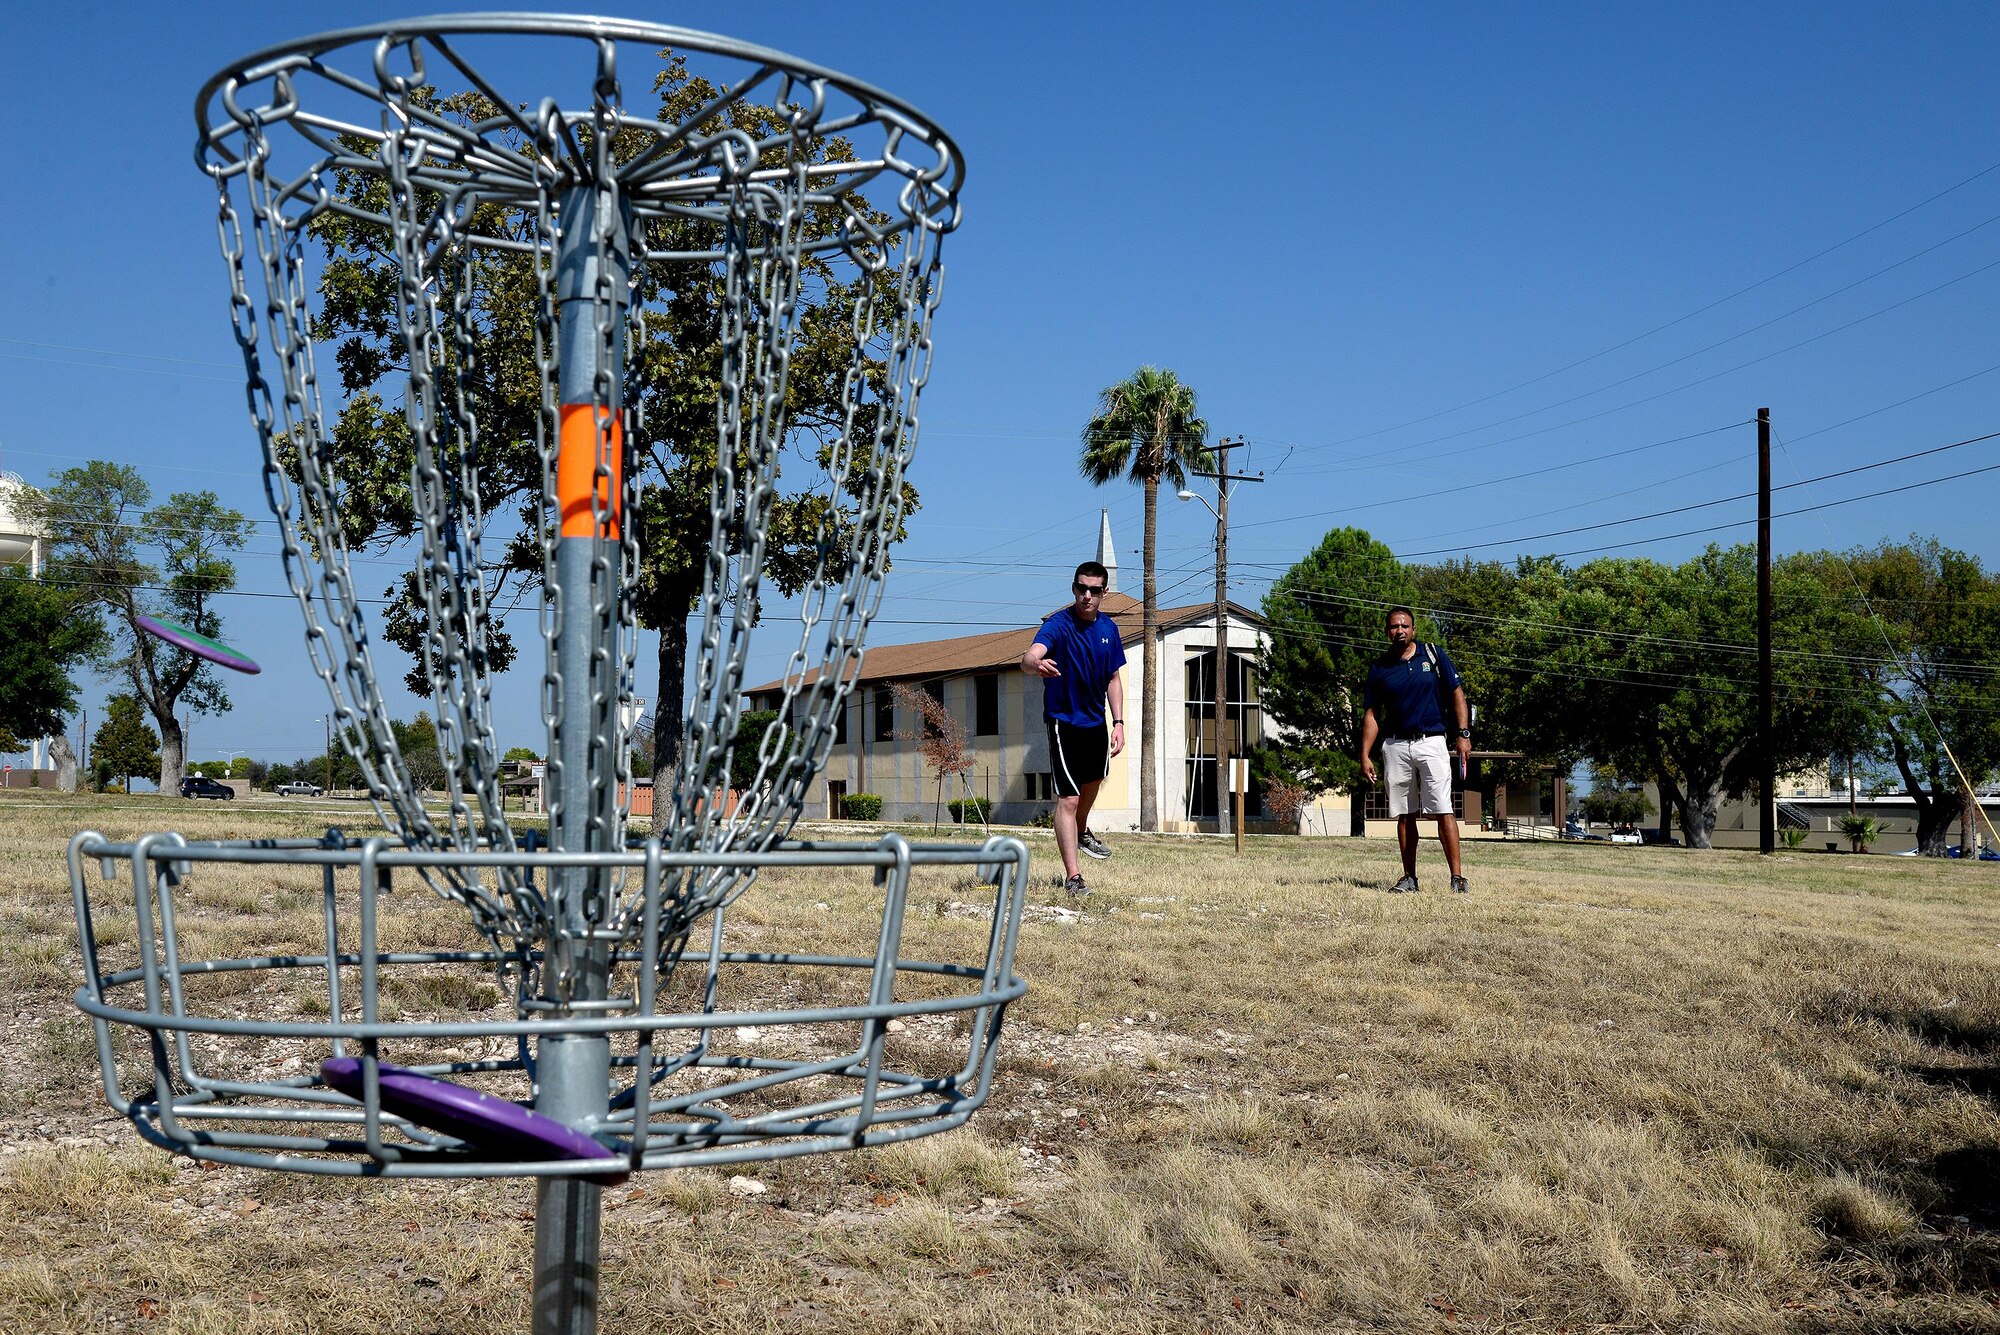 Second Lt. Matt Kellen, left, 47th Student Sqaudron student pilot recieves disc golf instruction from Fernando Brown, 47th Force Support Squadron Outdoor Recreation manager at the Dragon Lady Links disc golf course on Laughlin Air Force Base, Texas, Oct. 14, 2015. Dragon Lady Links is free to play , and the driver, mid-range, and putter disc can be rented at Outdoor Recreation for $2 a day. (U.S. Air Force photo by Airman 1st Class Brandon May)(Released)